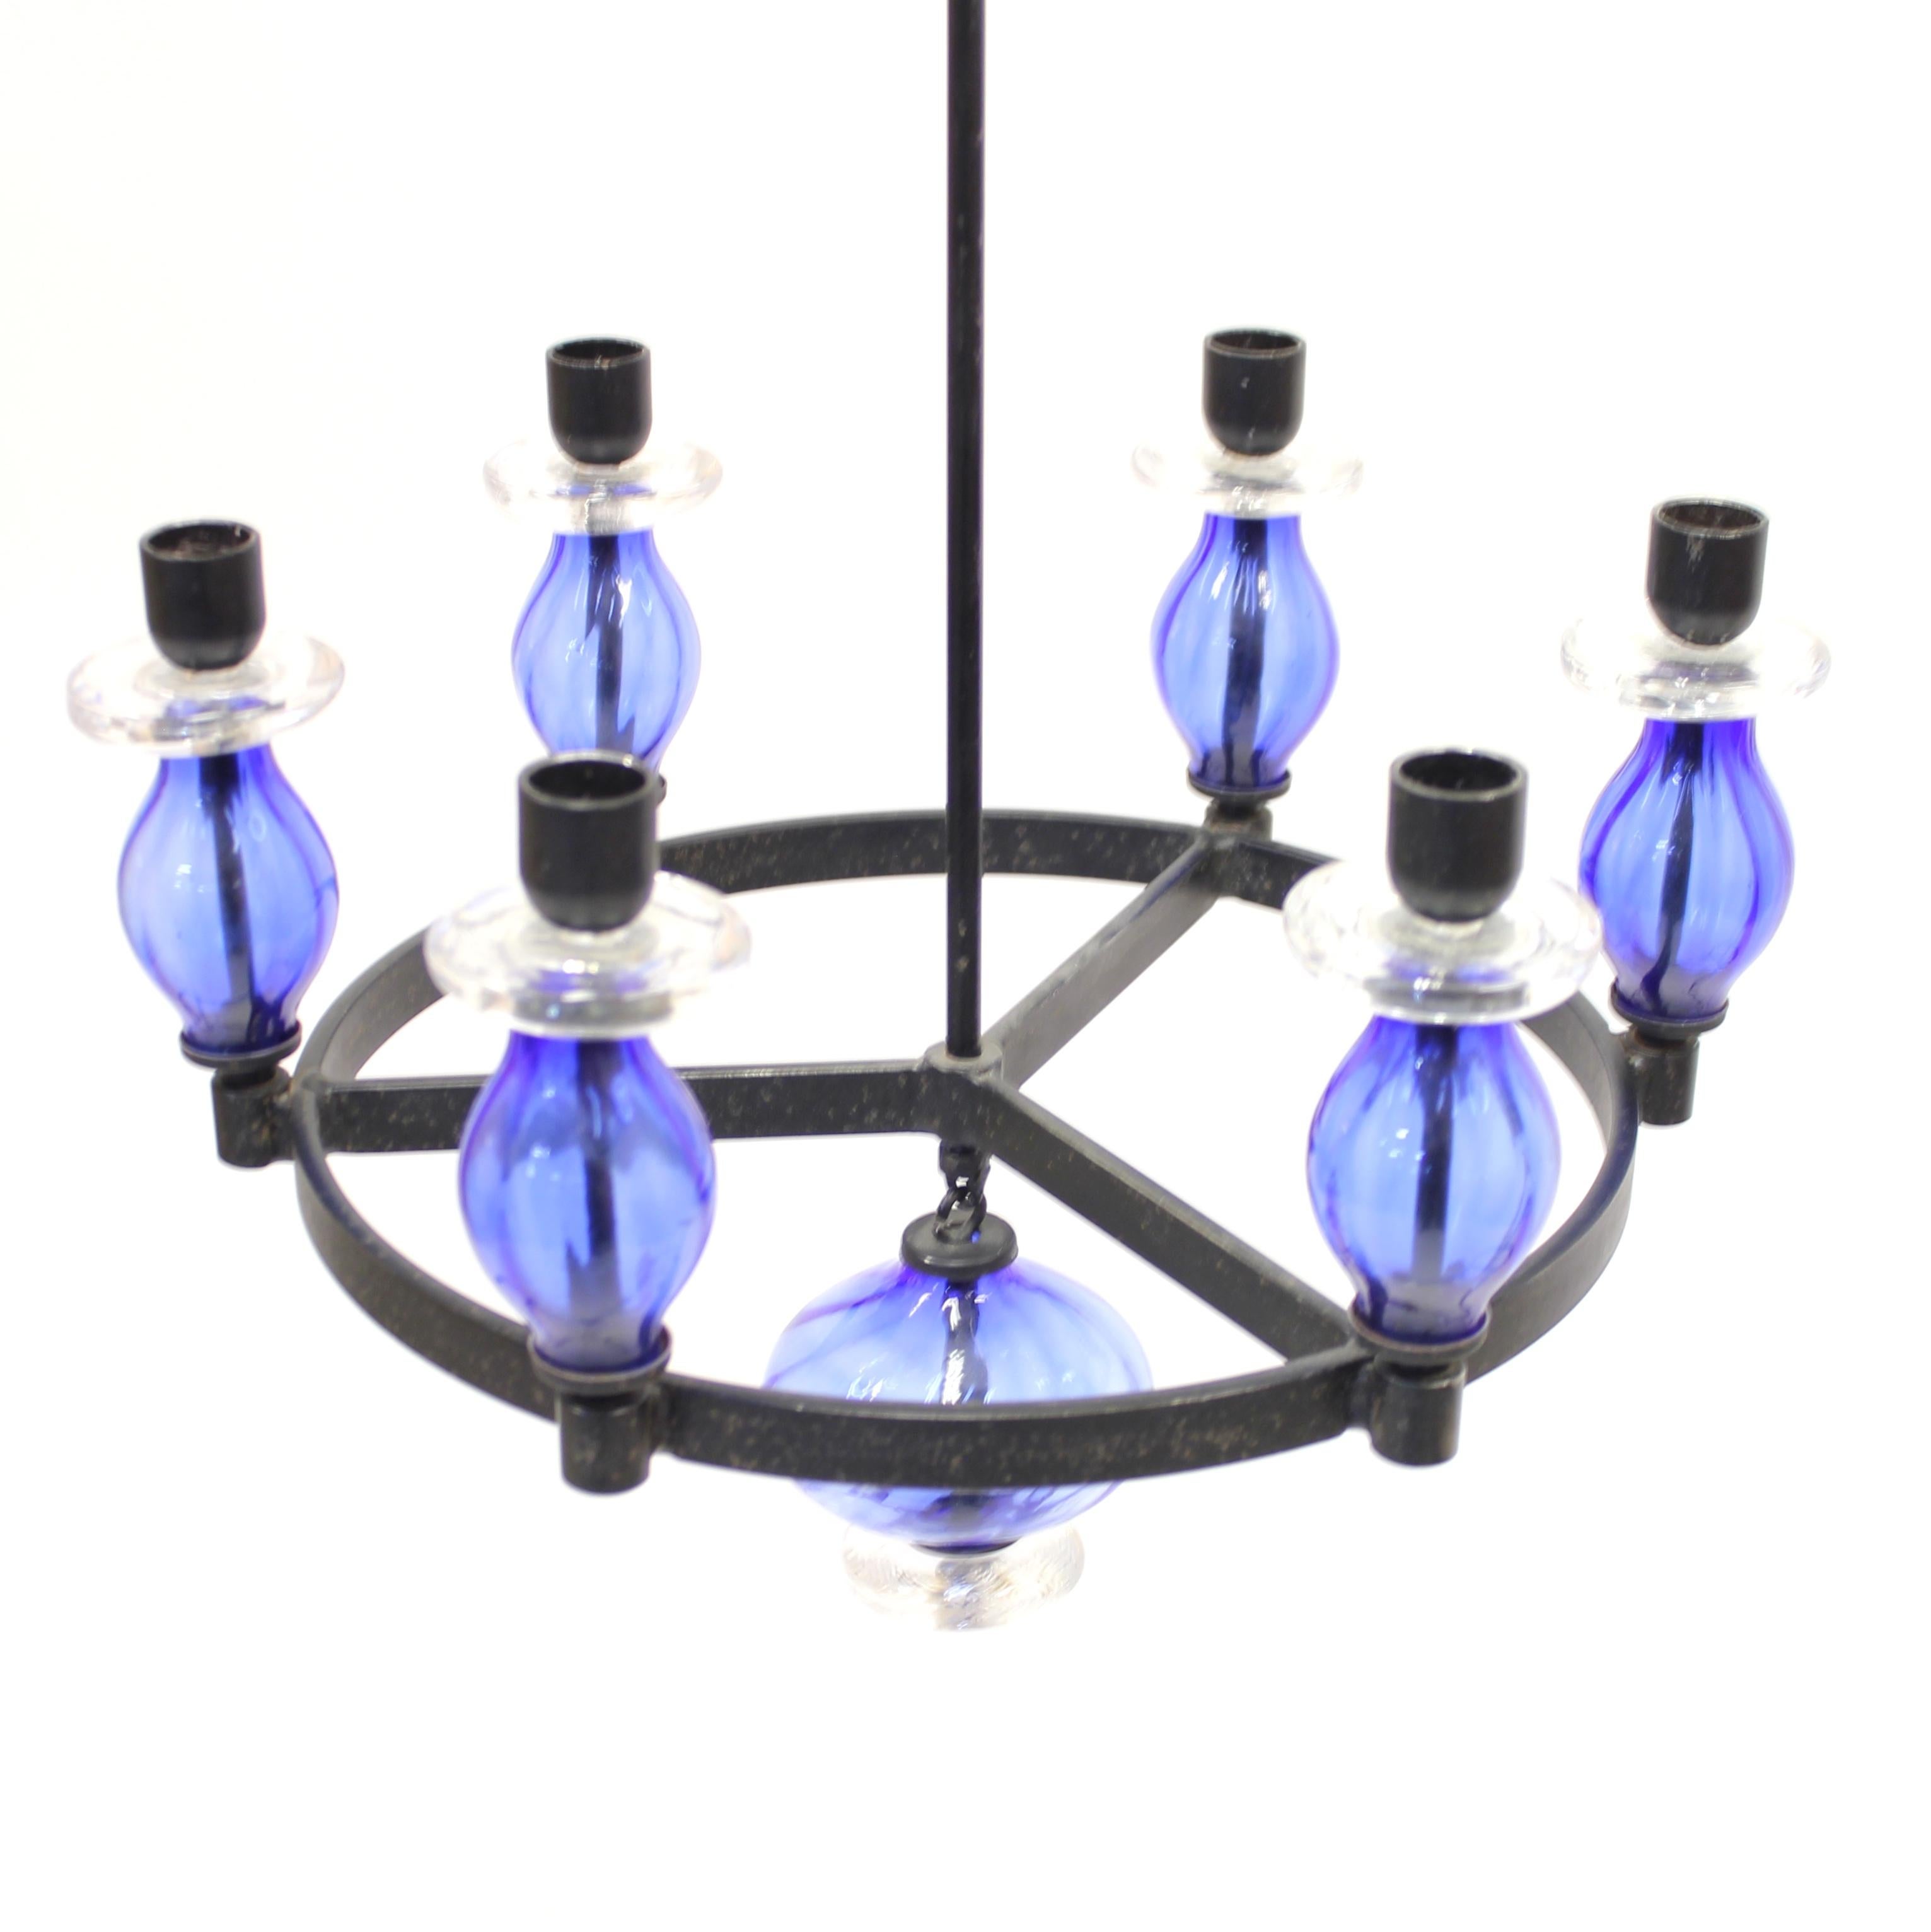 Erik Höglund, Rare Glass and Wrought Iron Chandelier, Boda Smide, 1960s For Sale 3